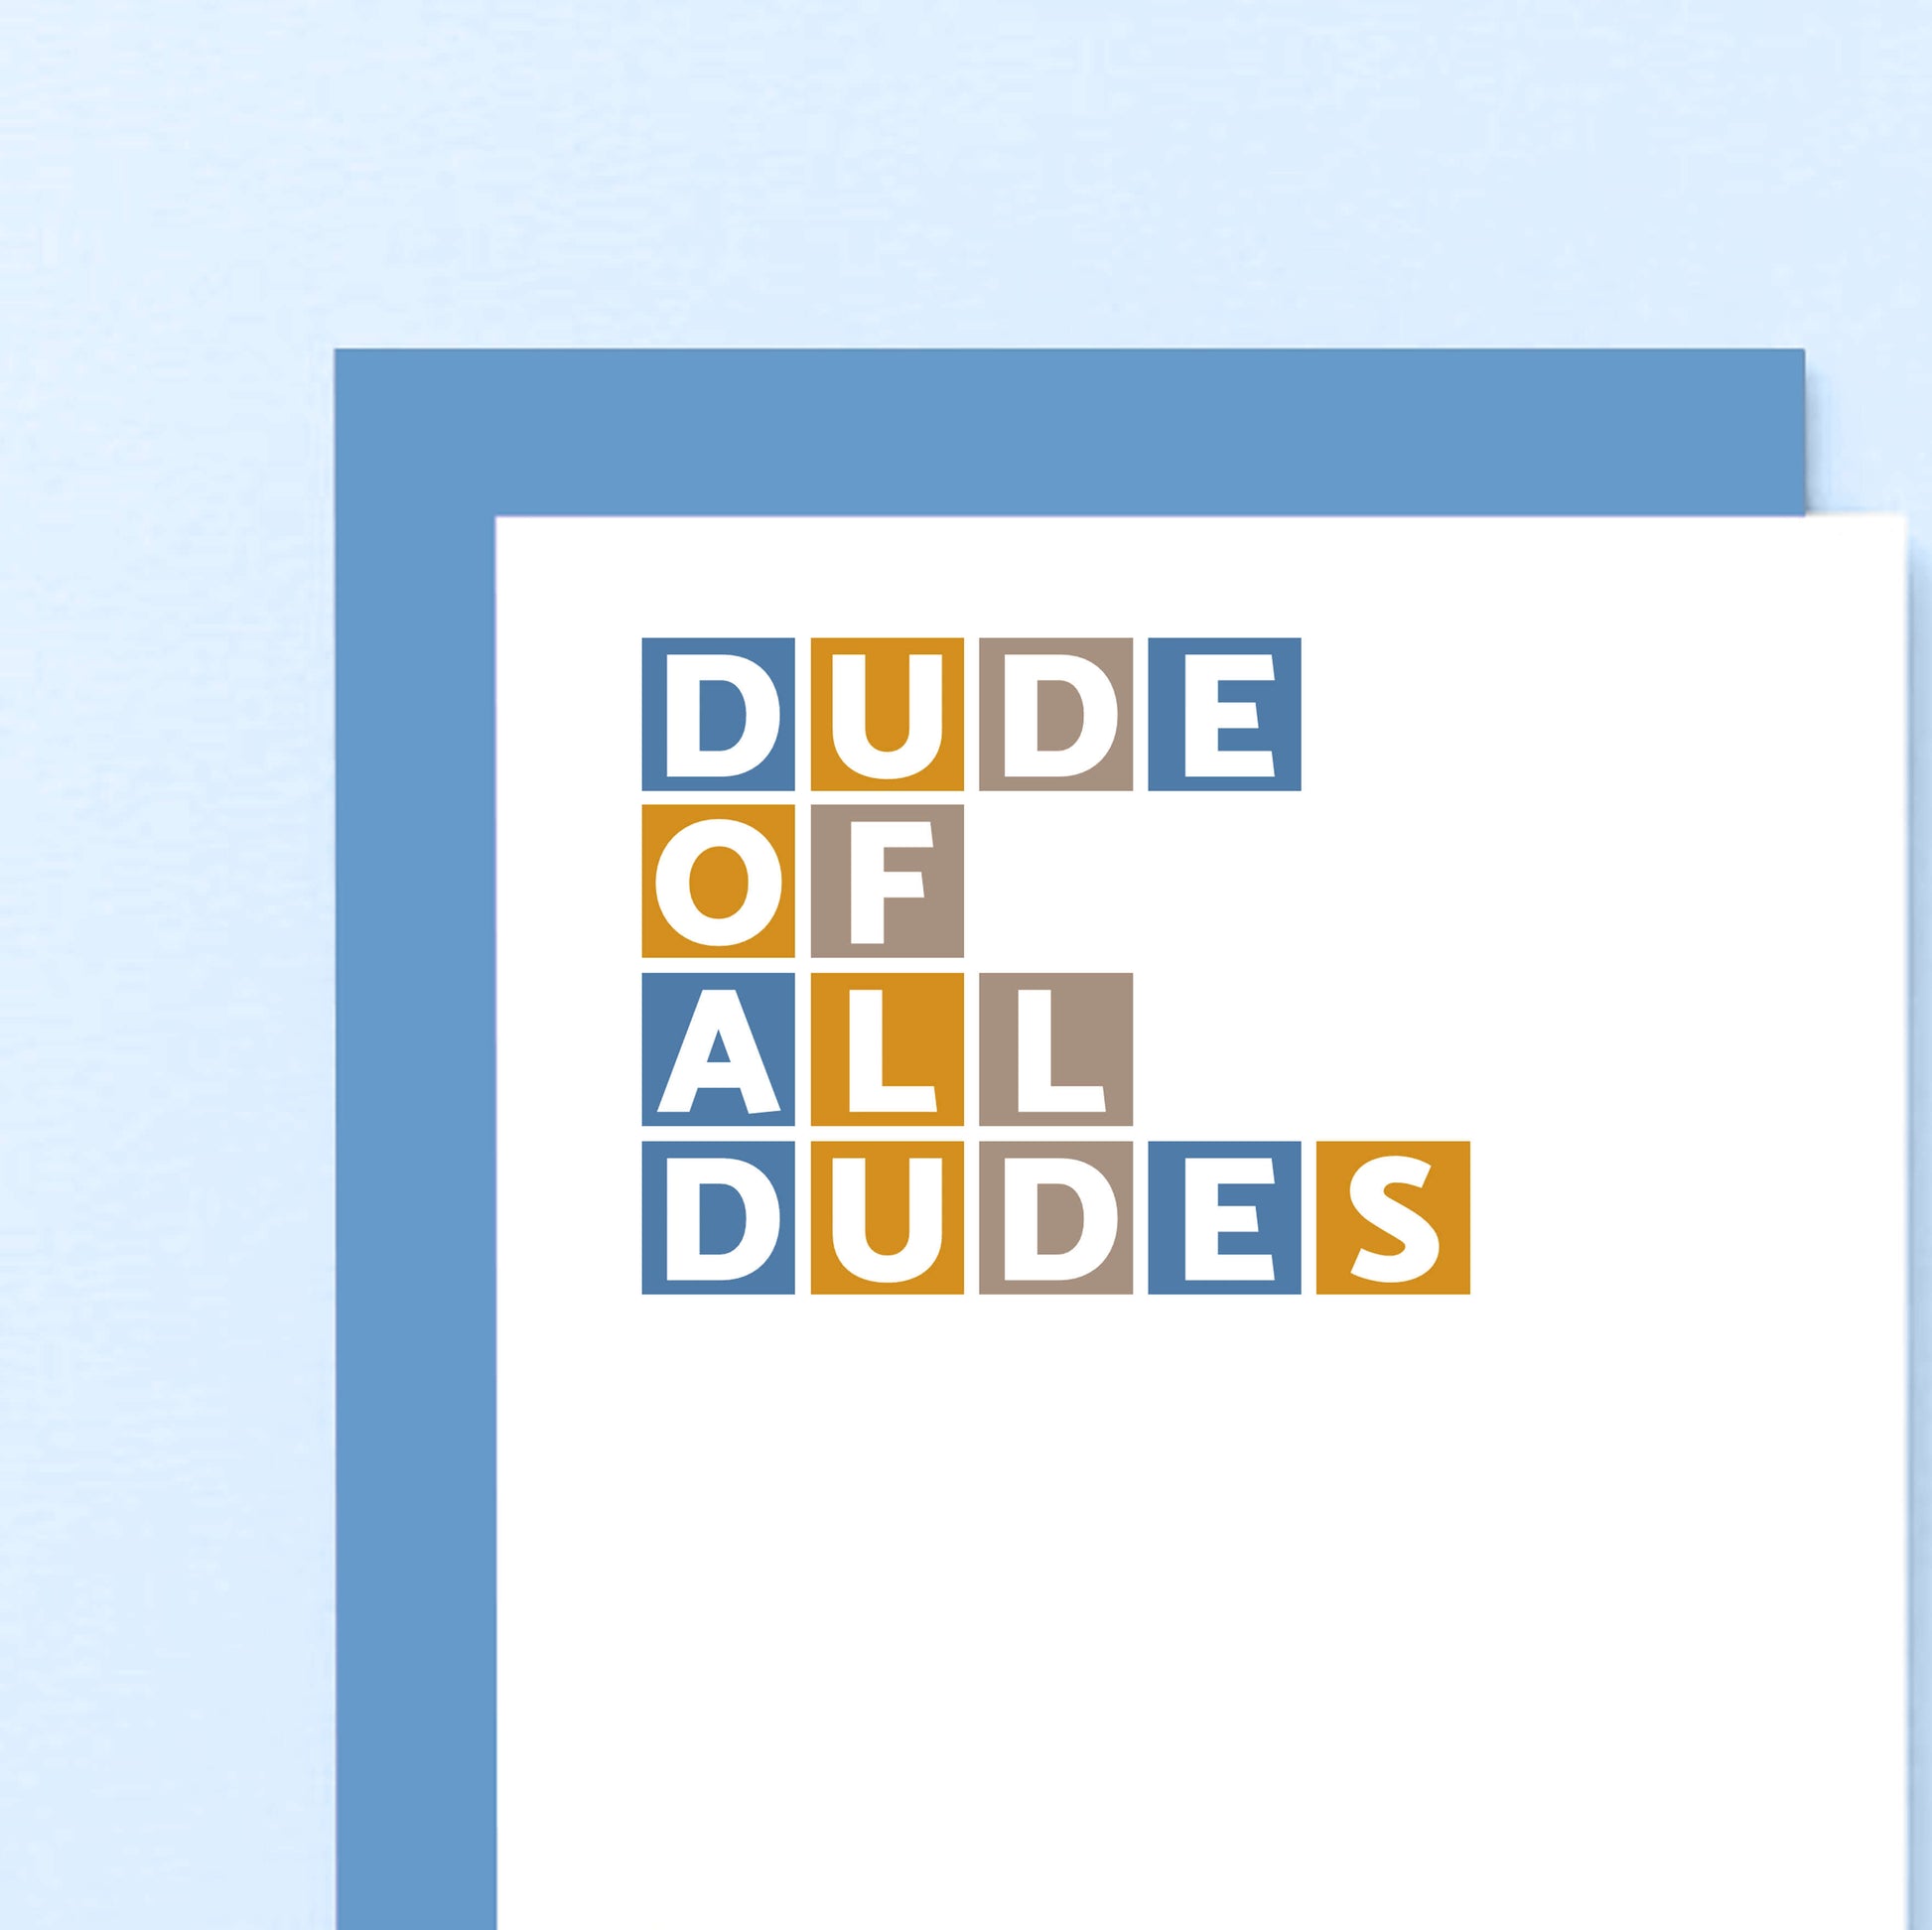 Dude Of All Dudes Card by SixElevenCreations. Product Code SE0337A6